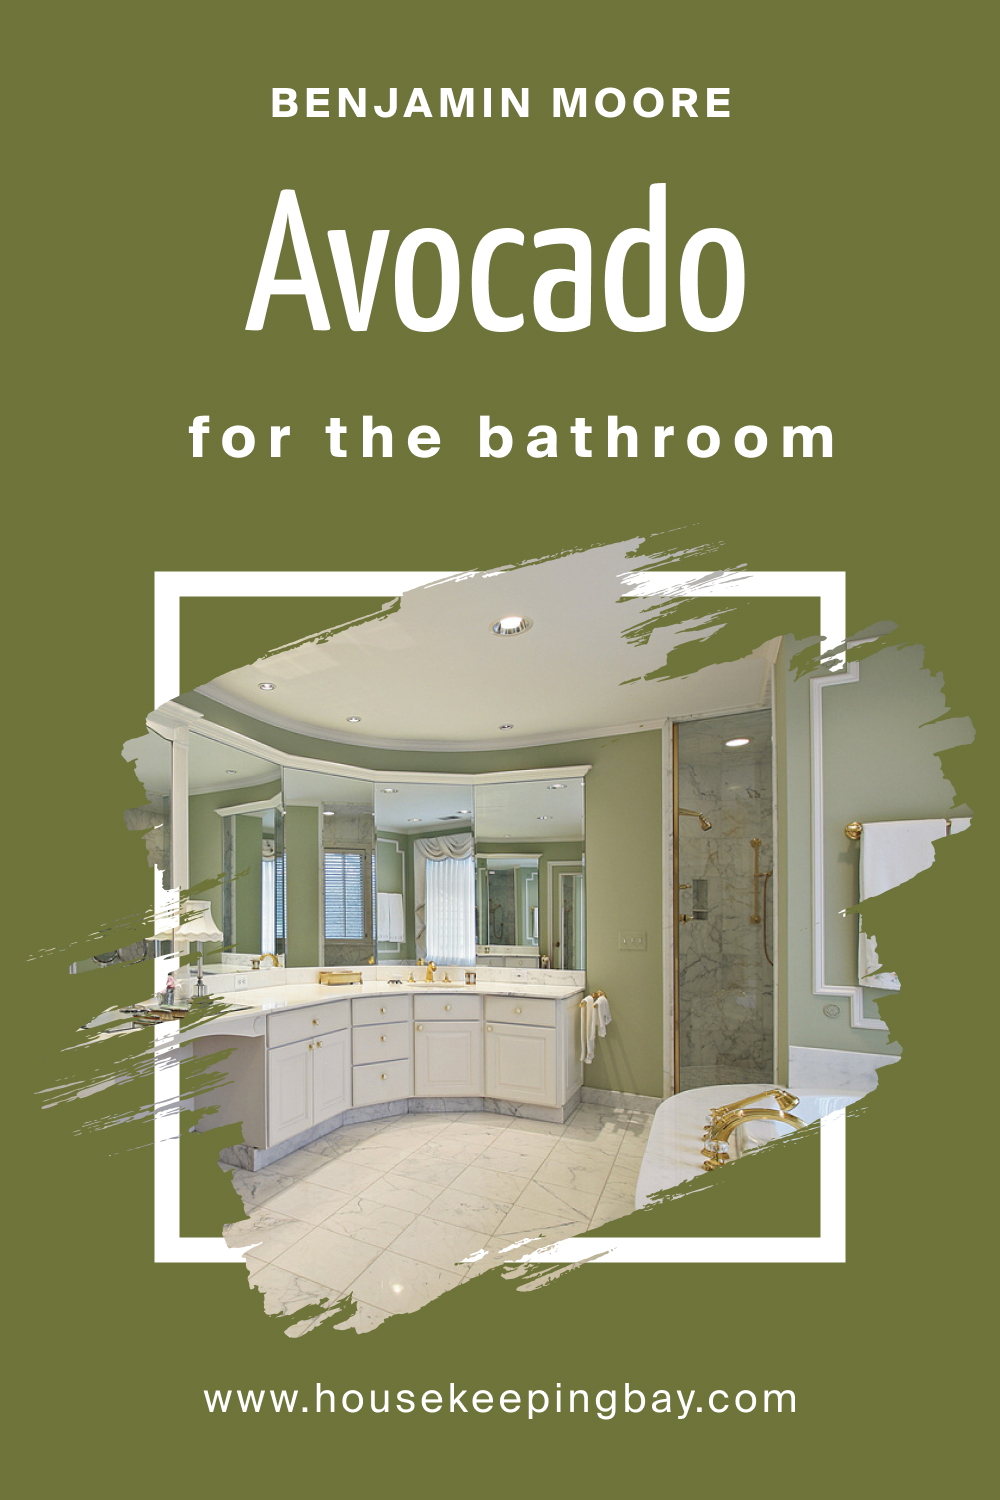 How to Use BM Avocado 2145-10 in the Bathroom?